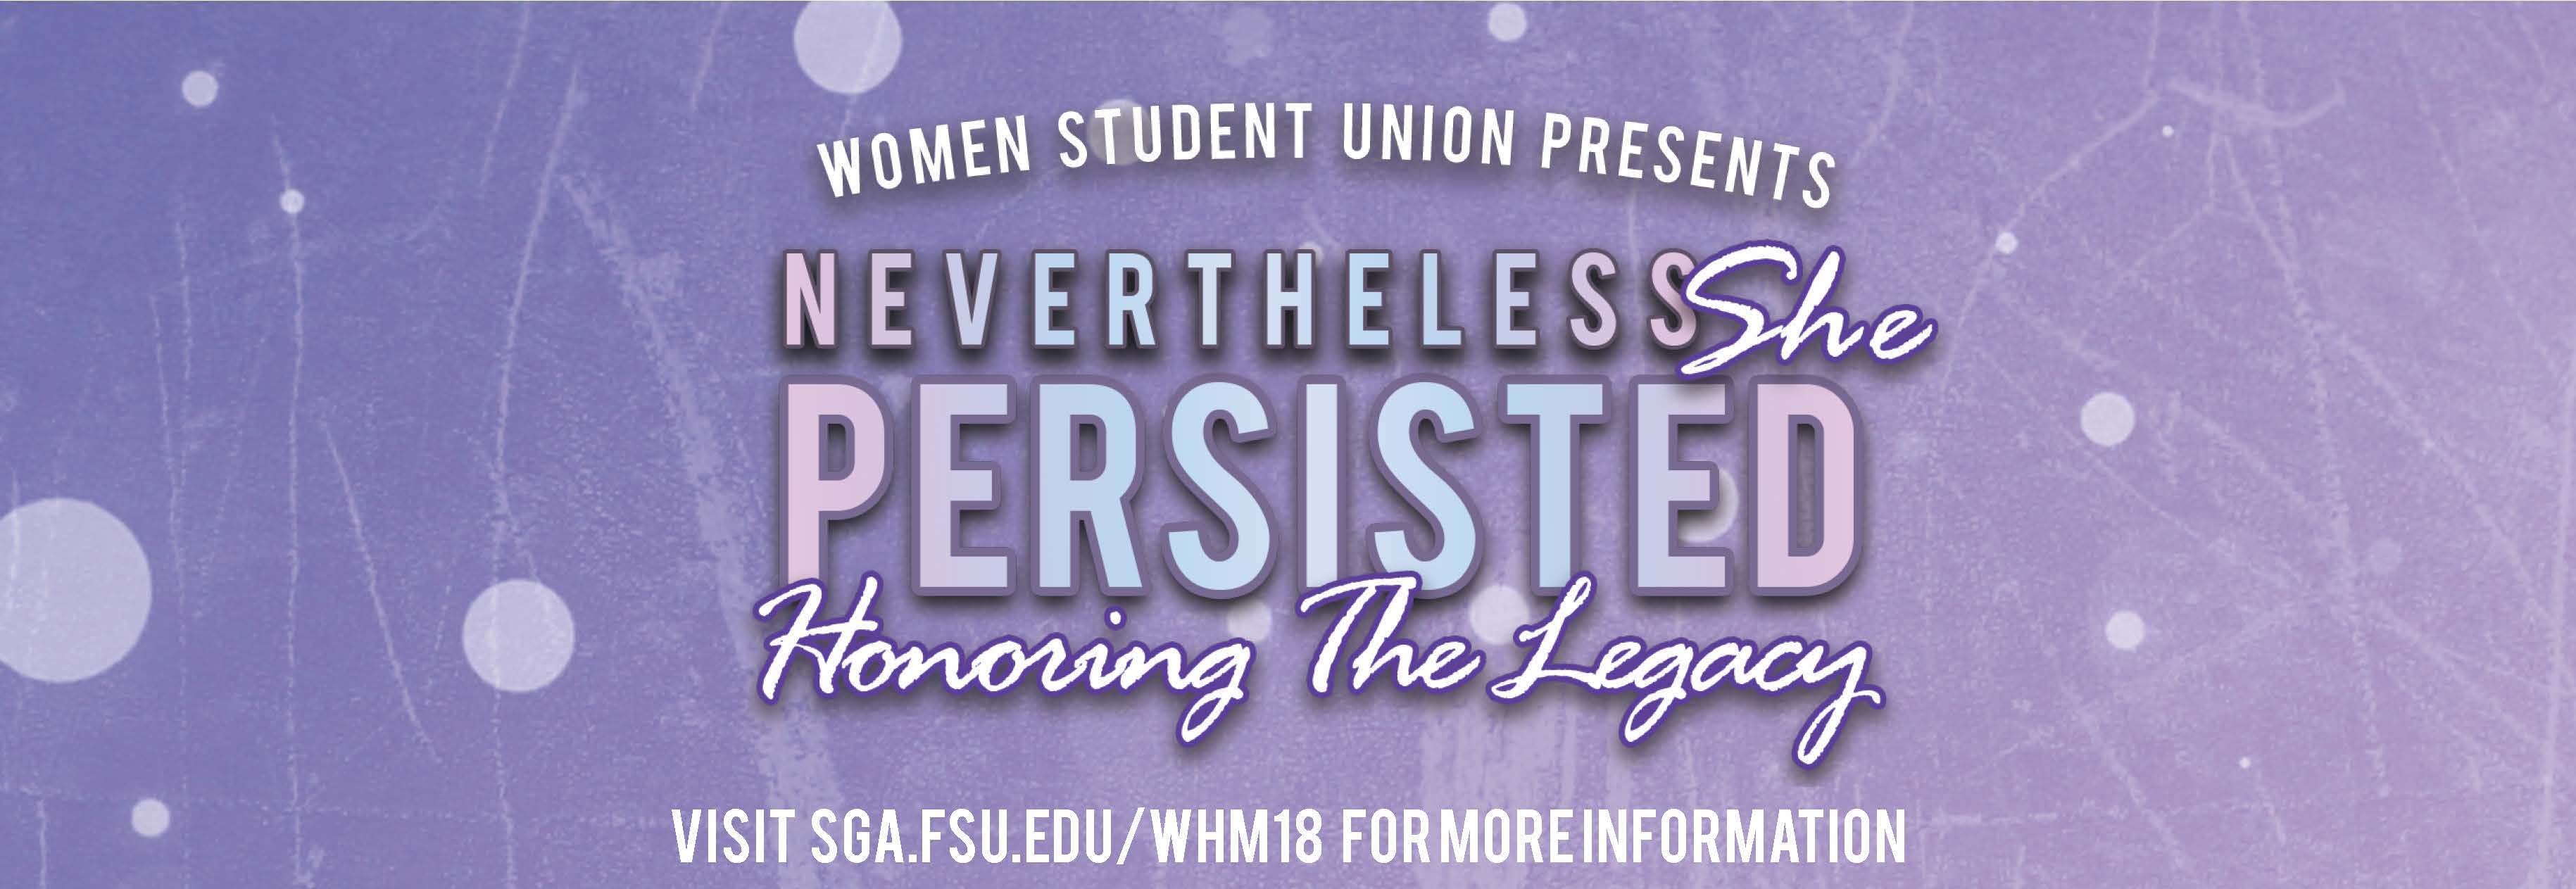 Women Student Union present Nevertheless She Persisted, Honoring The Legacy